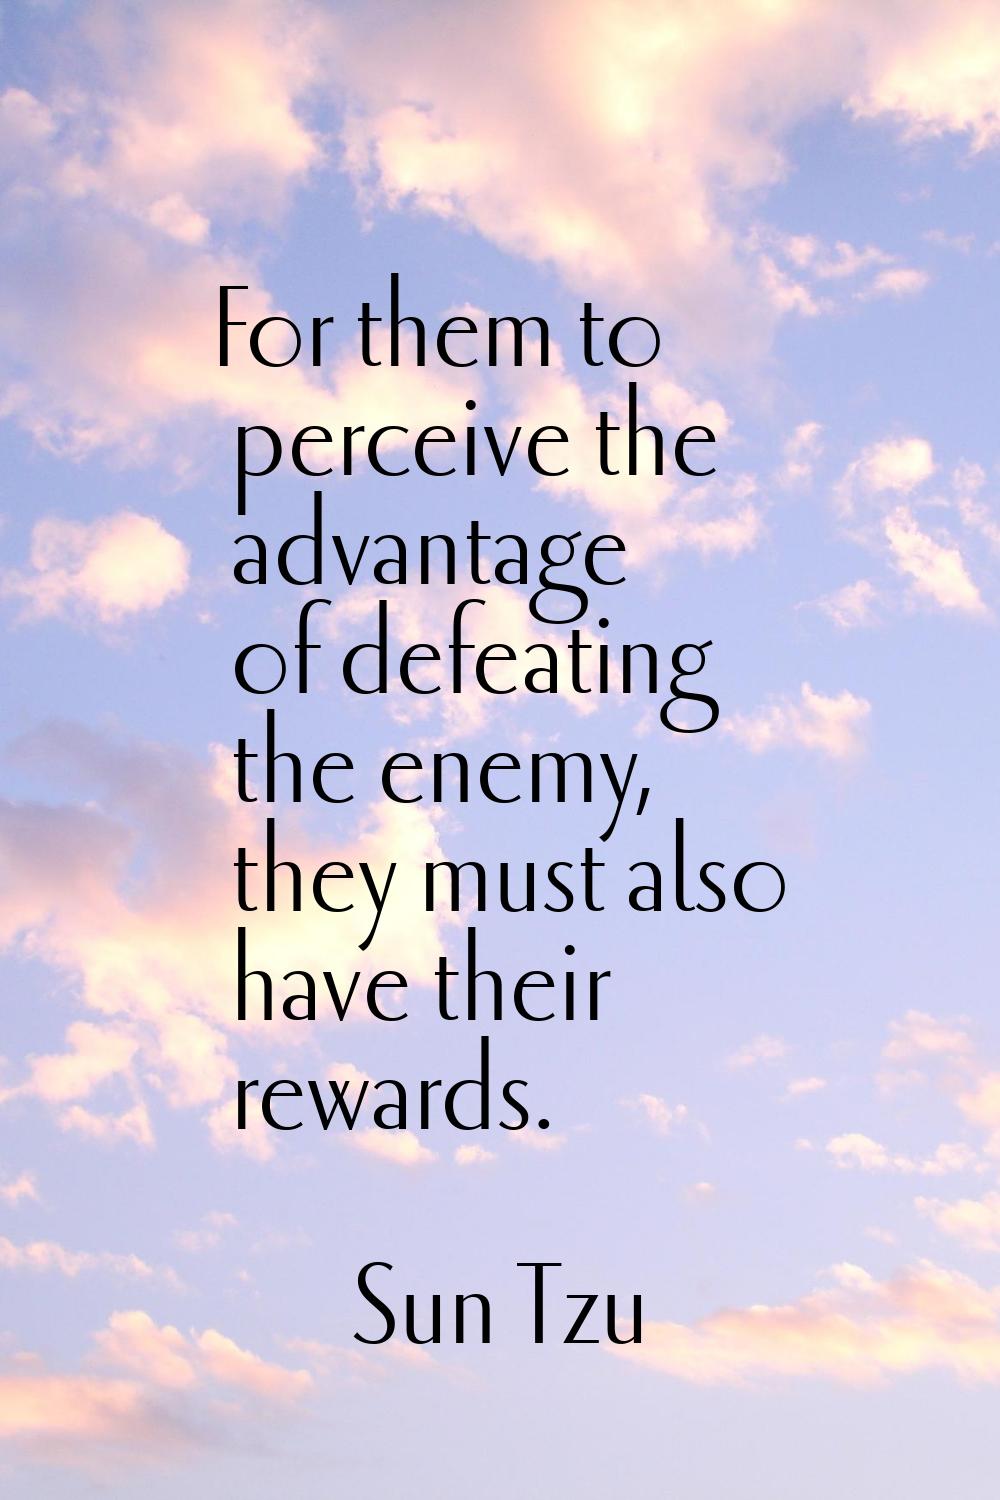 For them to perceive the advantage of defeating the enemy, they must also have their rewards.